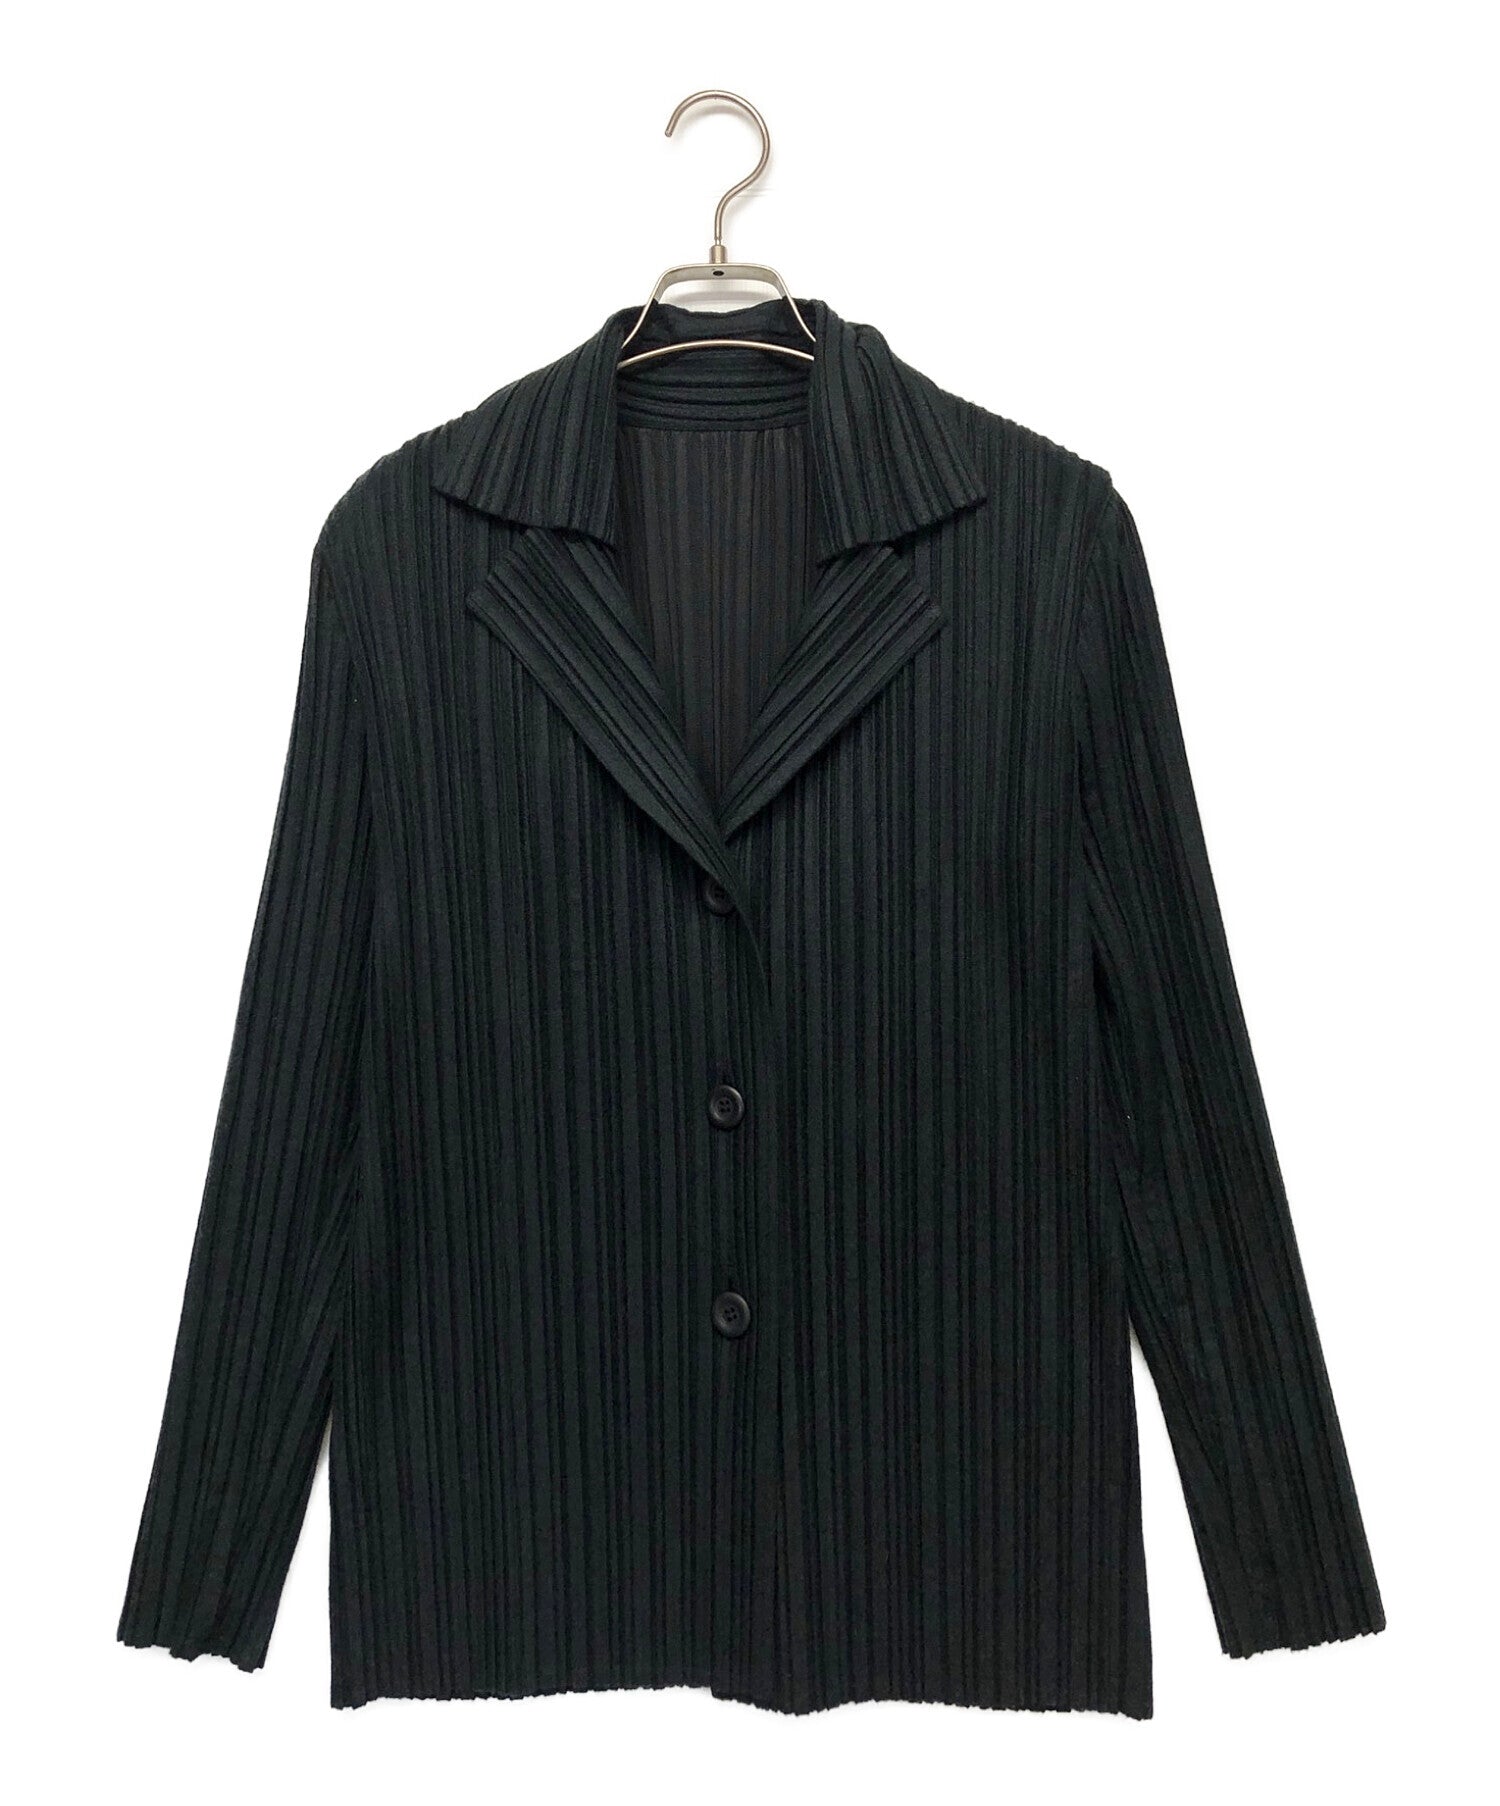 Pleated Shirt - Buy Pleated Shirt online in India